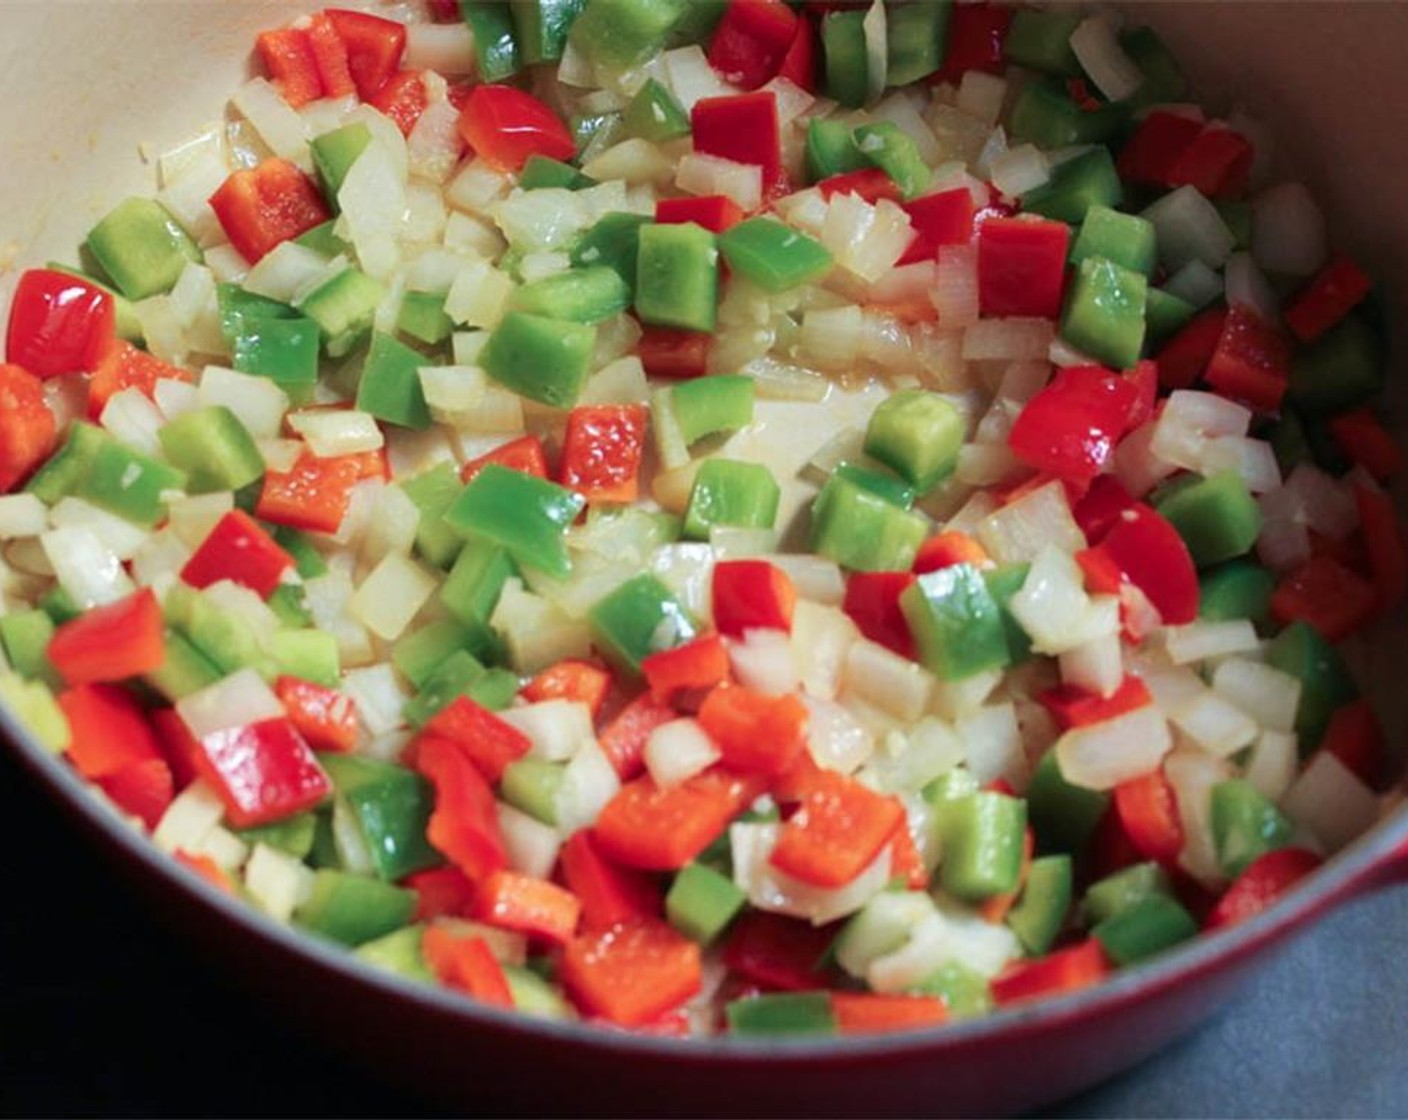 step 1 Heat Olive Oil (1 Tbsp)  in a Dutch oven or large pot. Add the Red Bell Pepper (1), Green Bell Pepper (1), Yellow Onion (1/2), and Garlic (2 cloves). Sauté for about 5 minutes, until the peppers soften and the onions become translucent.